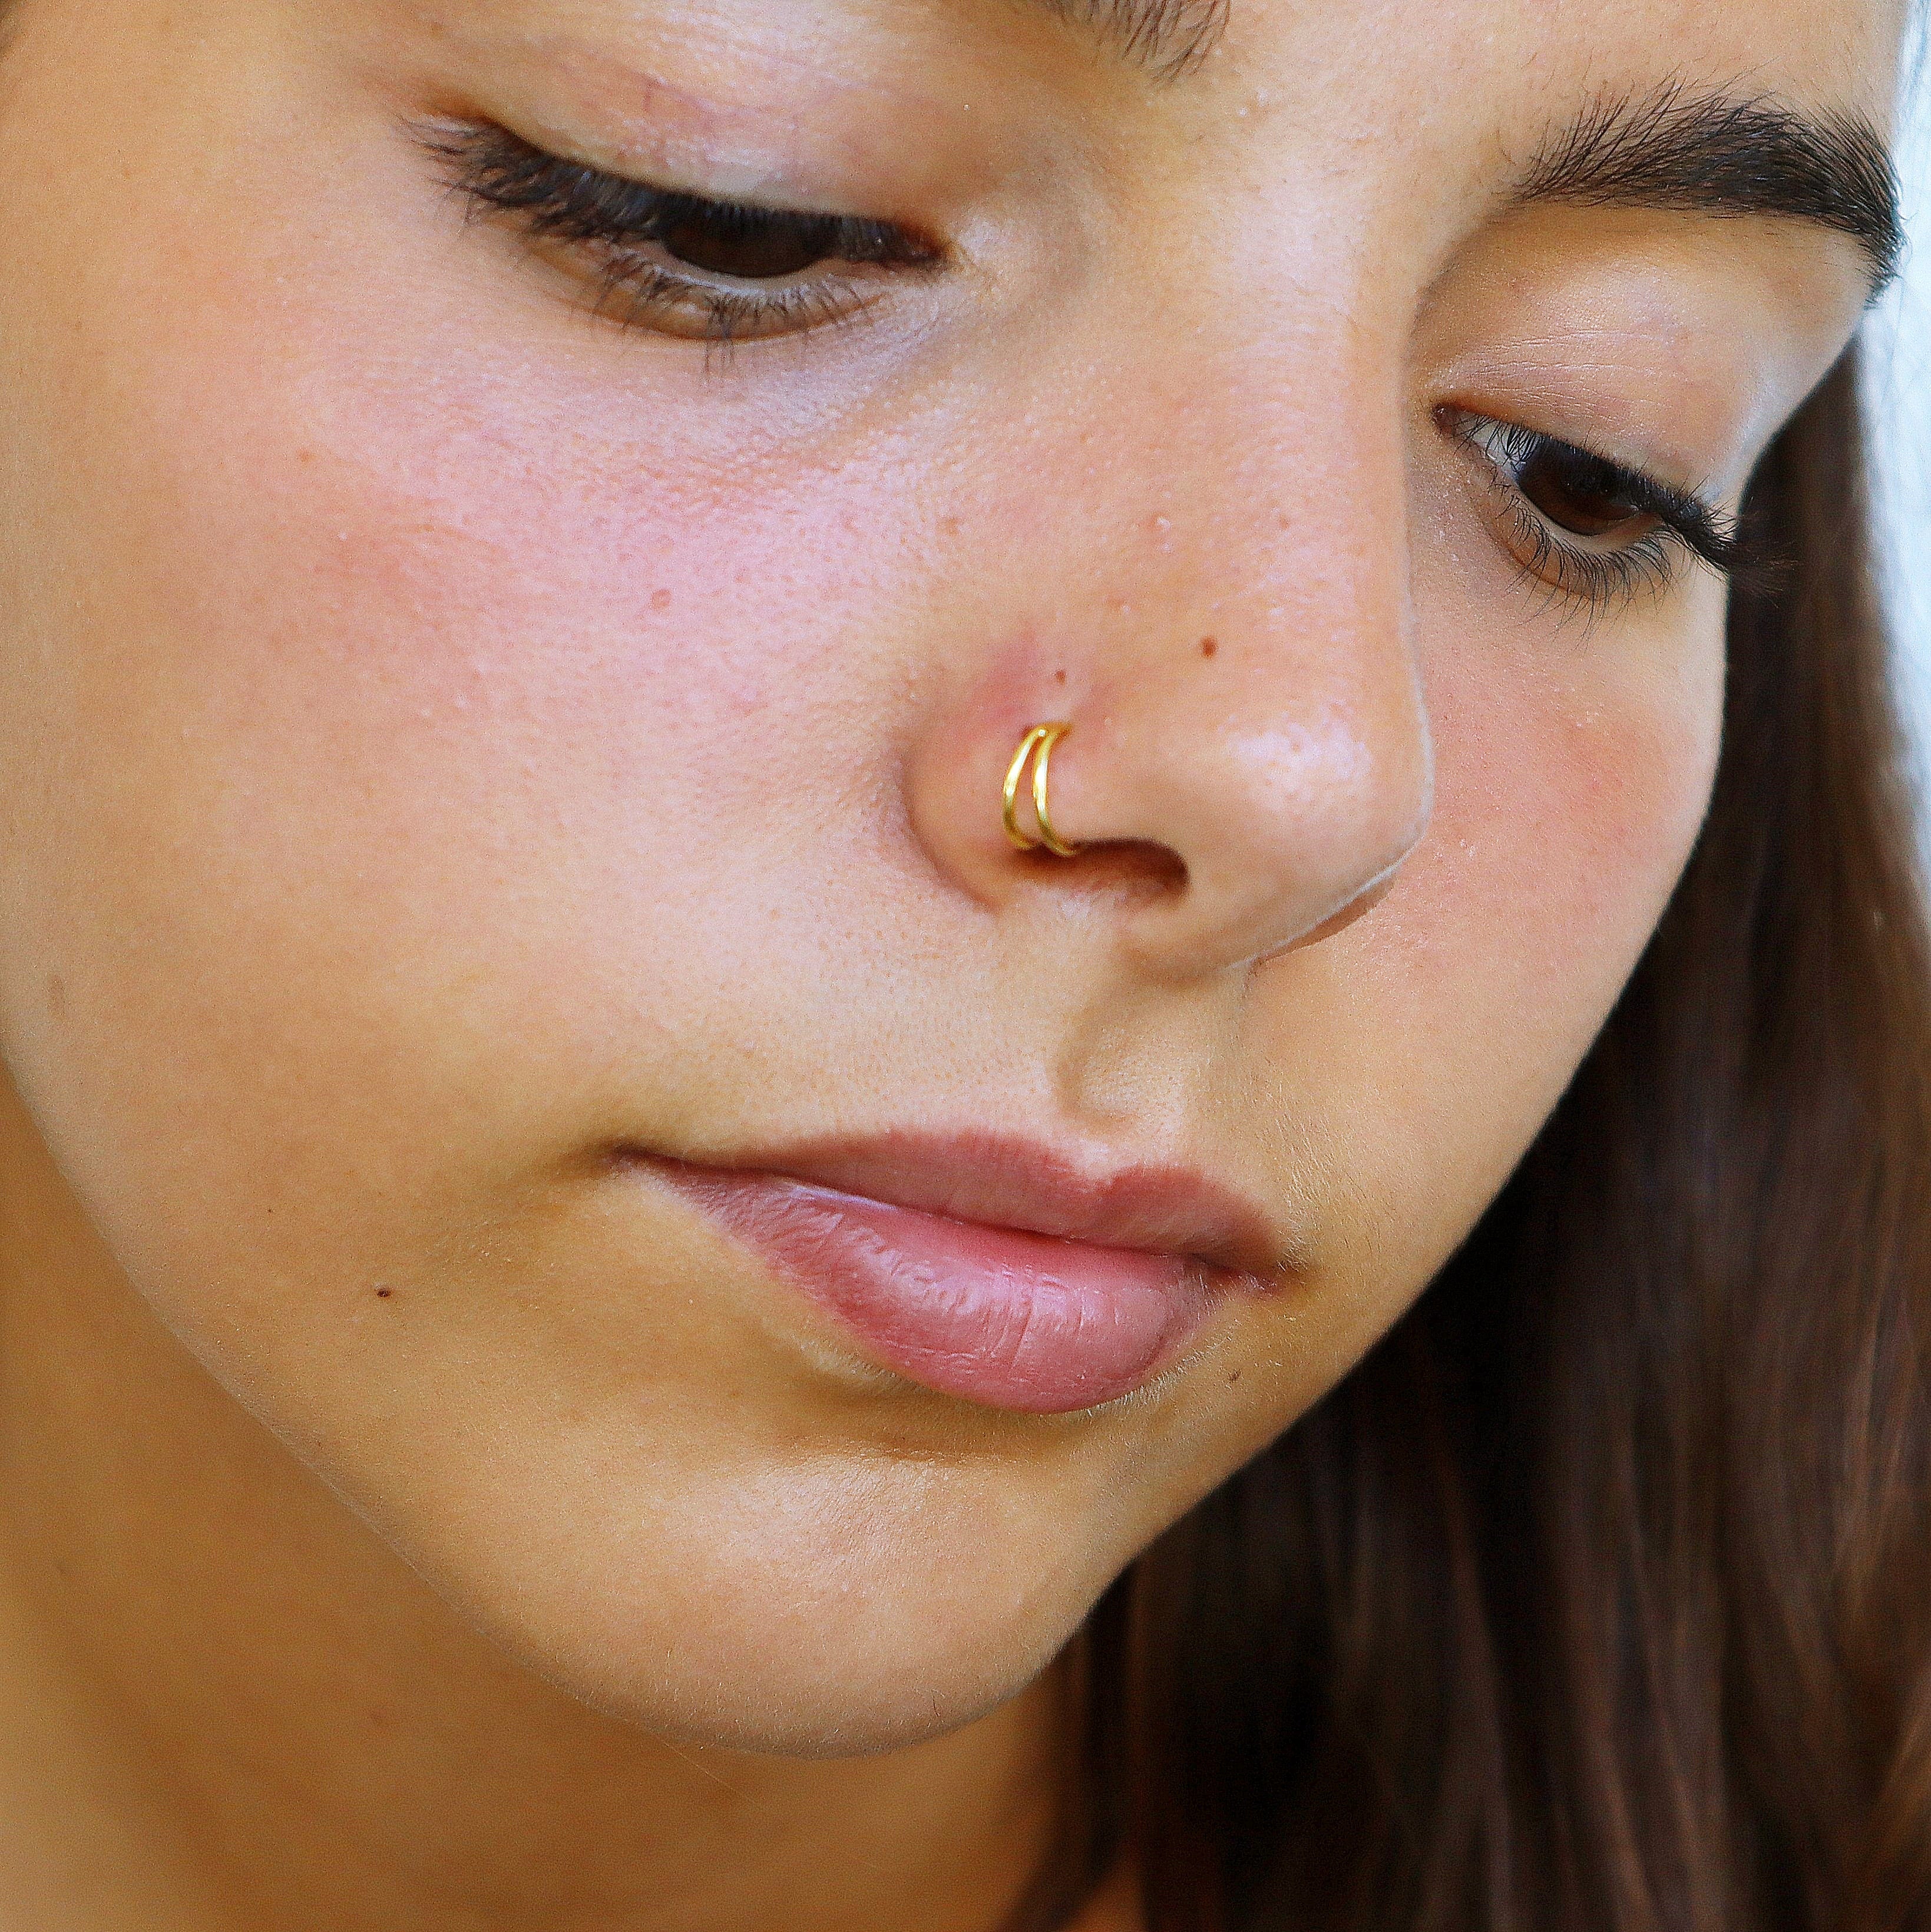 Buy Gold Nose Ring, Silver Nose Hoop, Small Thin Nose Piercing Ring, Tiny Nose  Piercing Jewelry, 24g 22g 20g Nose Ring Online in India - Etsy